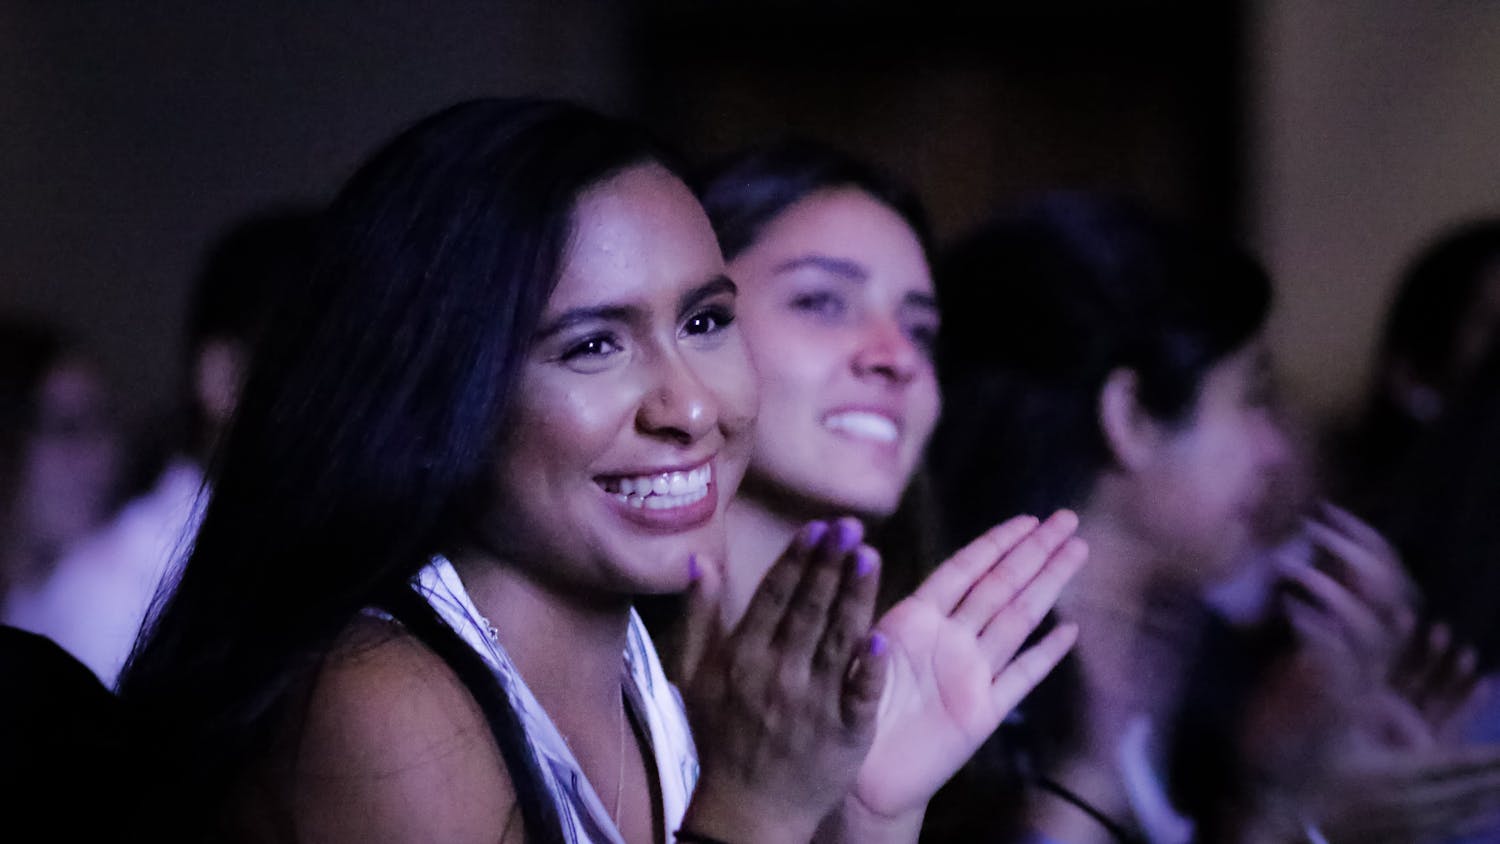 Alexia Yau, a 19-year-old UF natural resource conservation junior, cheers as Julissa Calderon, a Buzzfeed video producer and the keynote speaker at the UF Hispanic-Latinx Student Assembly, concludes her presentation.